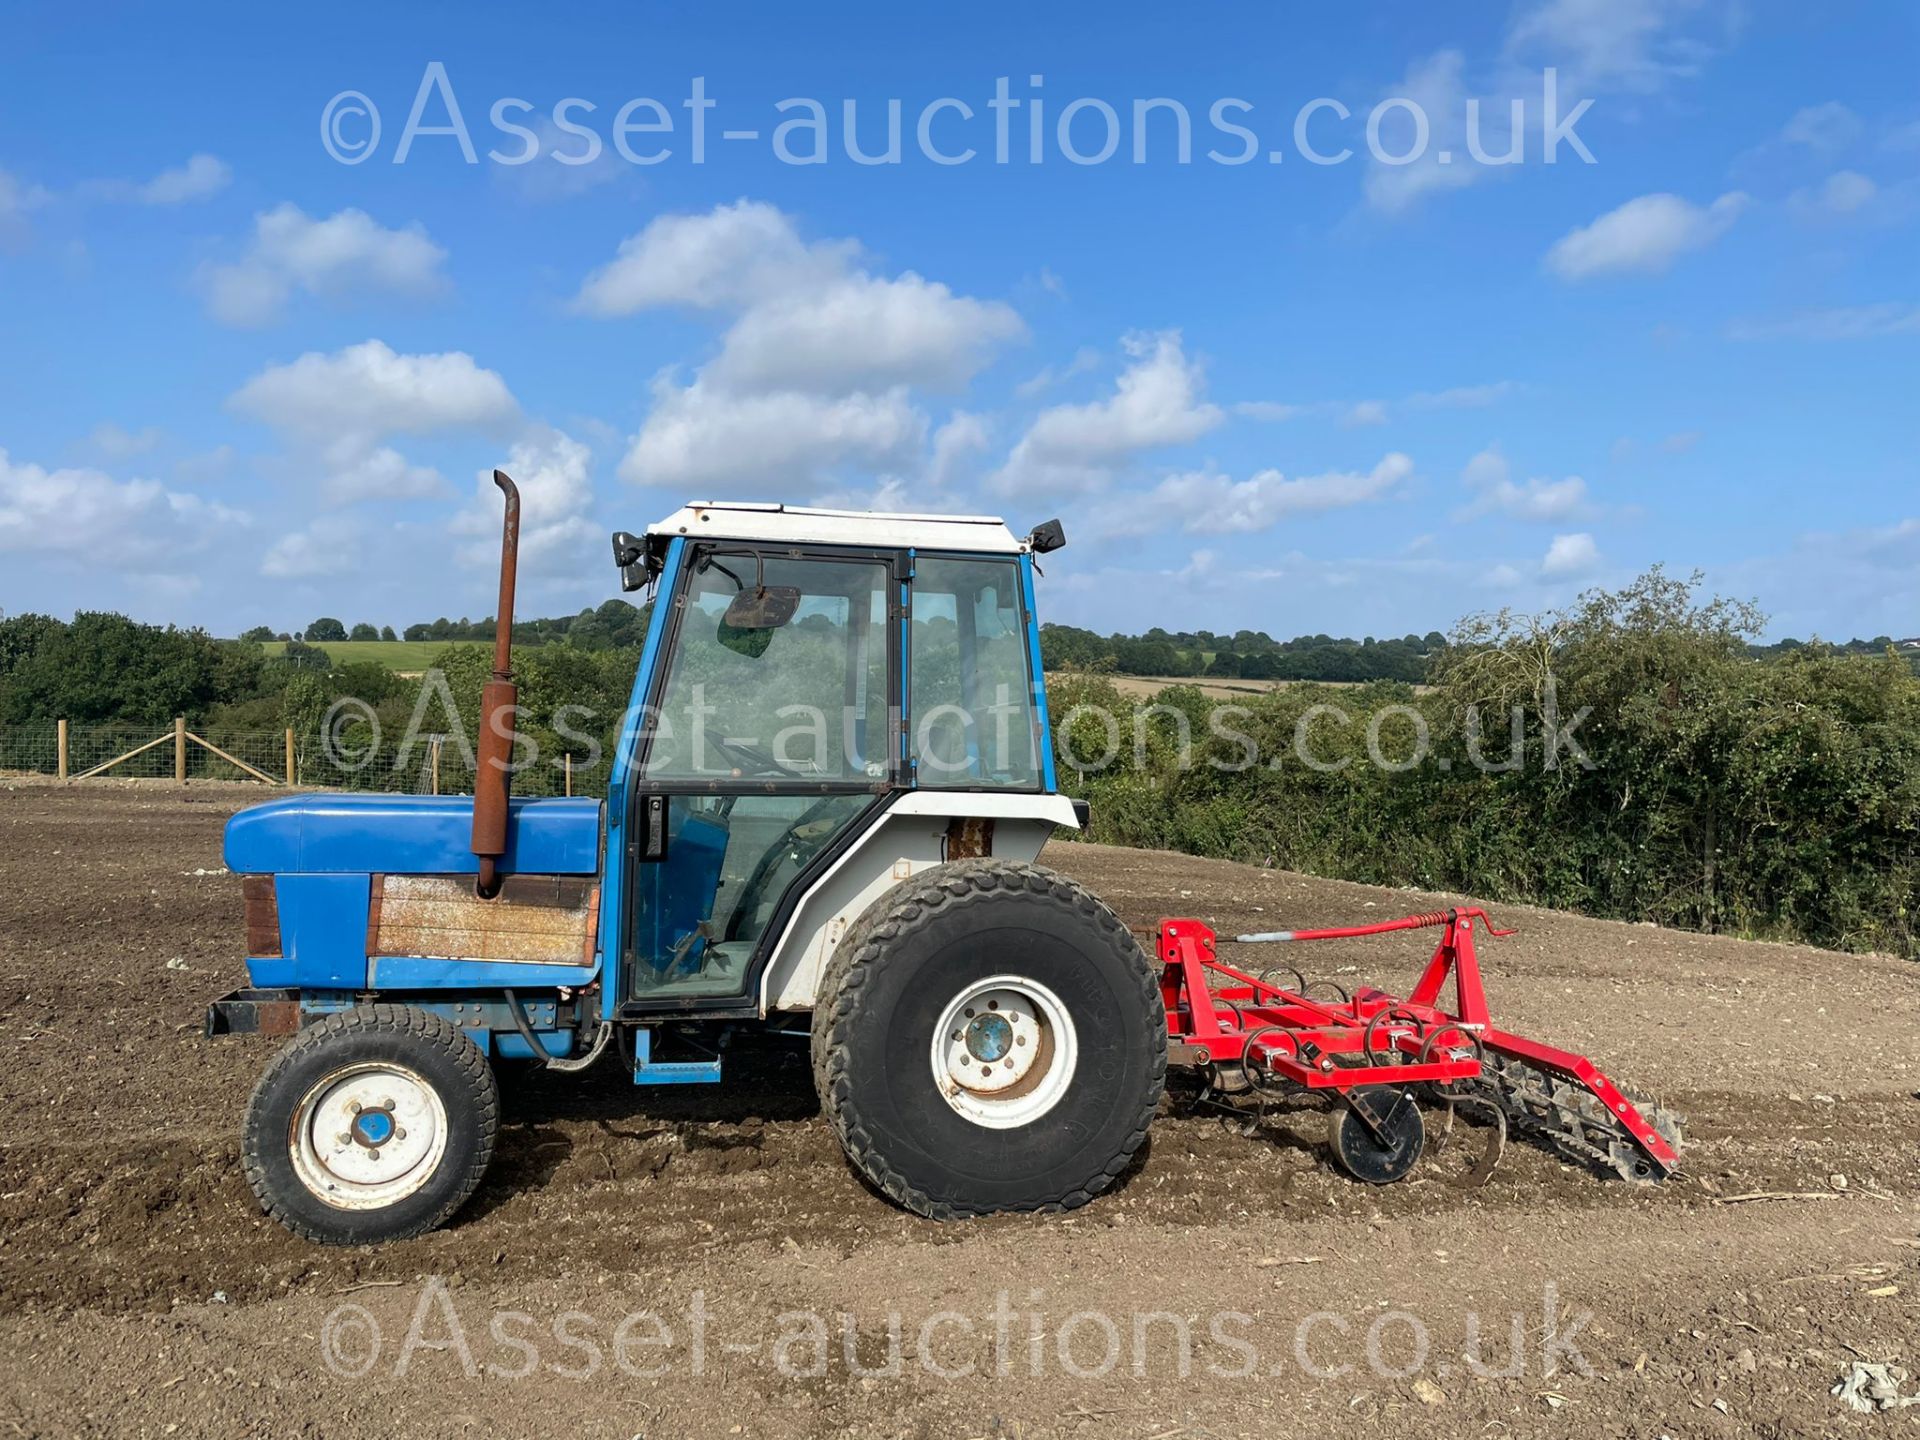 FORD 2120 TRACTOR WITH CULTIVATOR, 4 WHEEL DRIVE, STILL IN USE, RUNS AND WORKS *NO VAT*